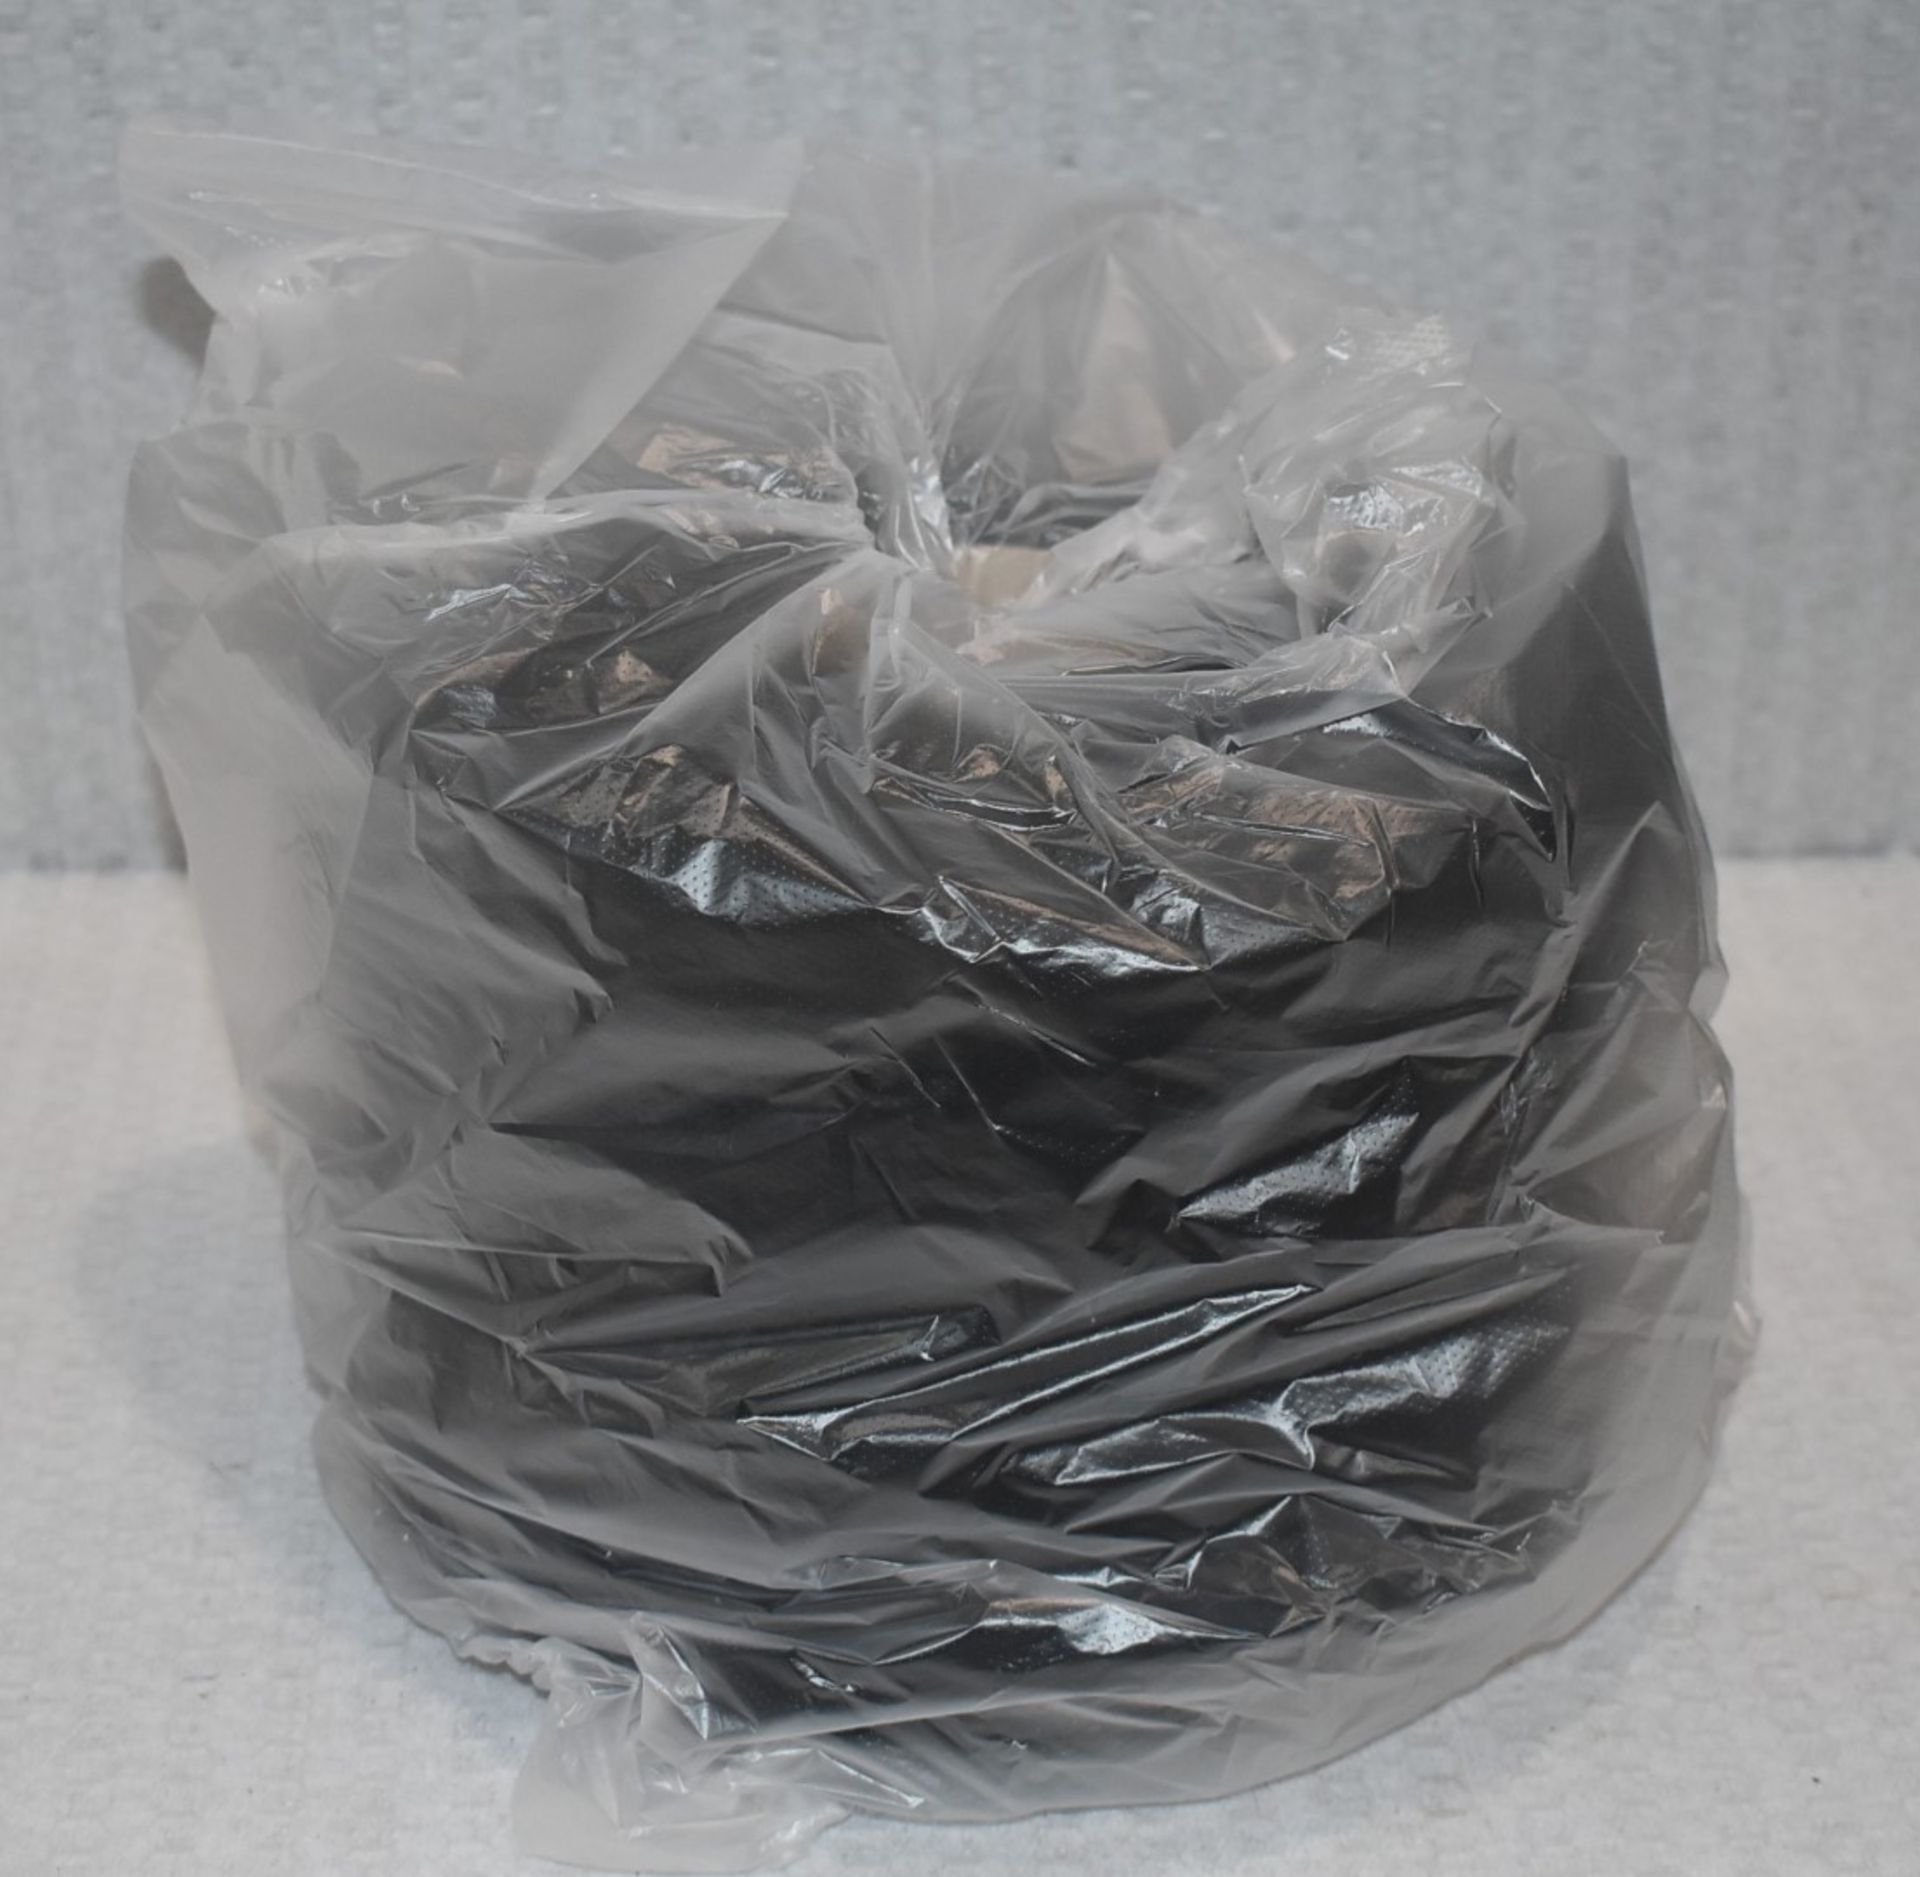 12 x Cones of 1/7,5 Lagona Knitting Yarn - Charcoal - Approx Weight: 2,300g - New Stock ABL Yarn - Image 3 of 9